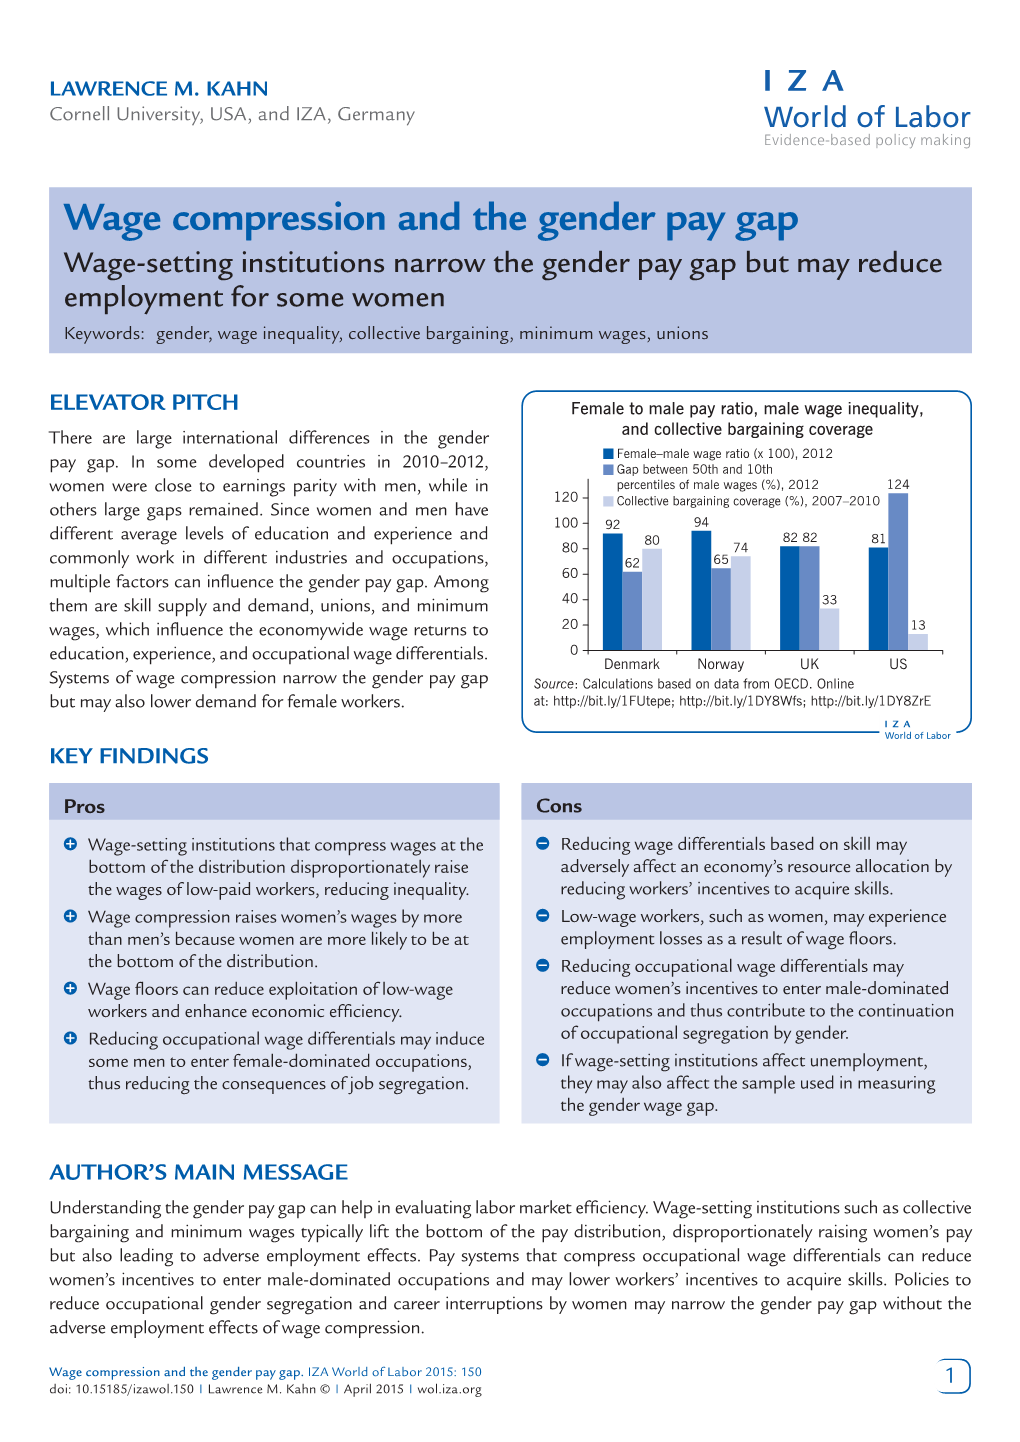 Wage Compression and the Gender Pay